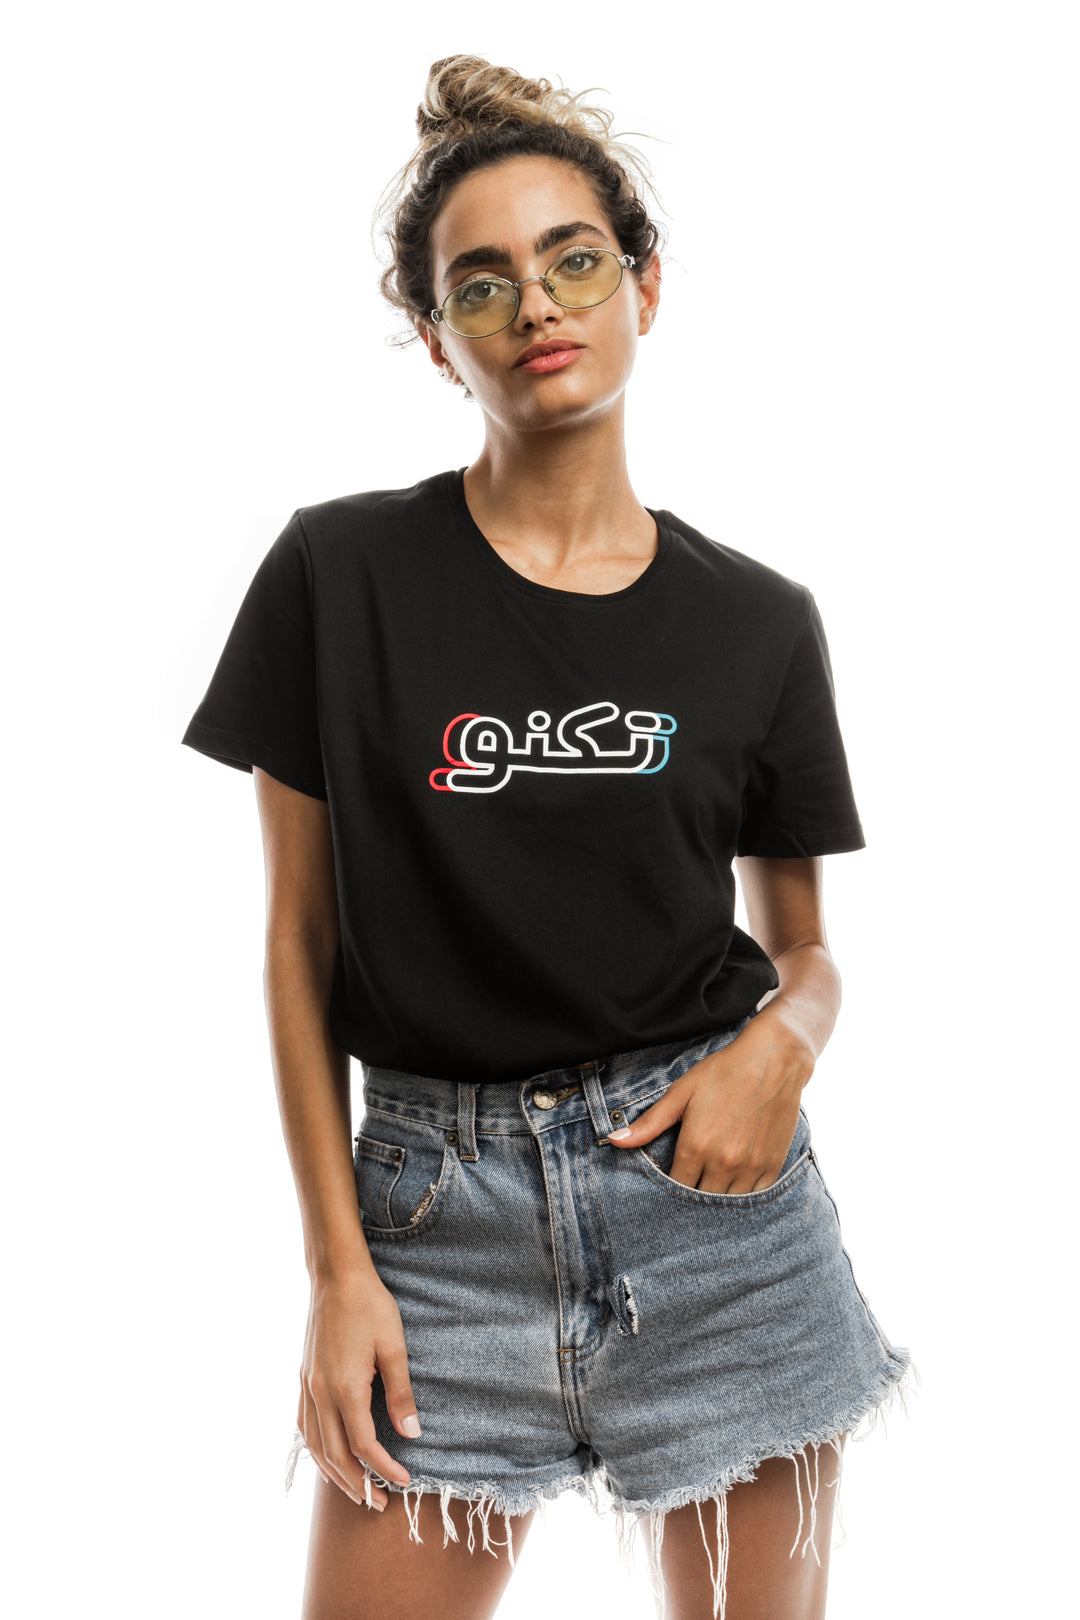 Young adult female wearing black T-shirt with Techno written in Arabic تكنو and printed in blue, red and white silkscreen in the center of the t-shirt along with blue jeans shorts and glasses.